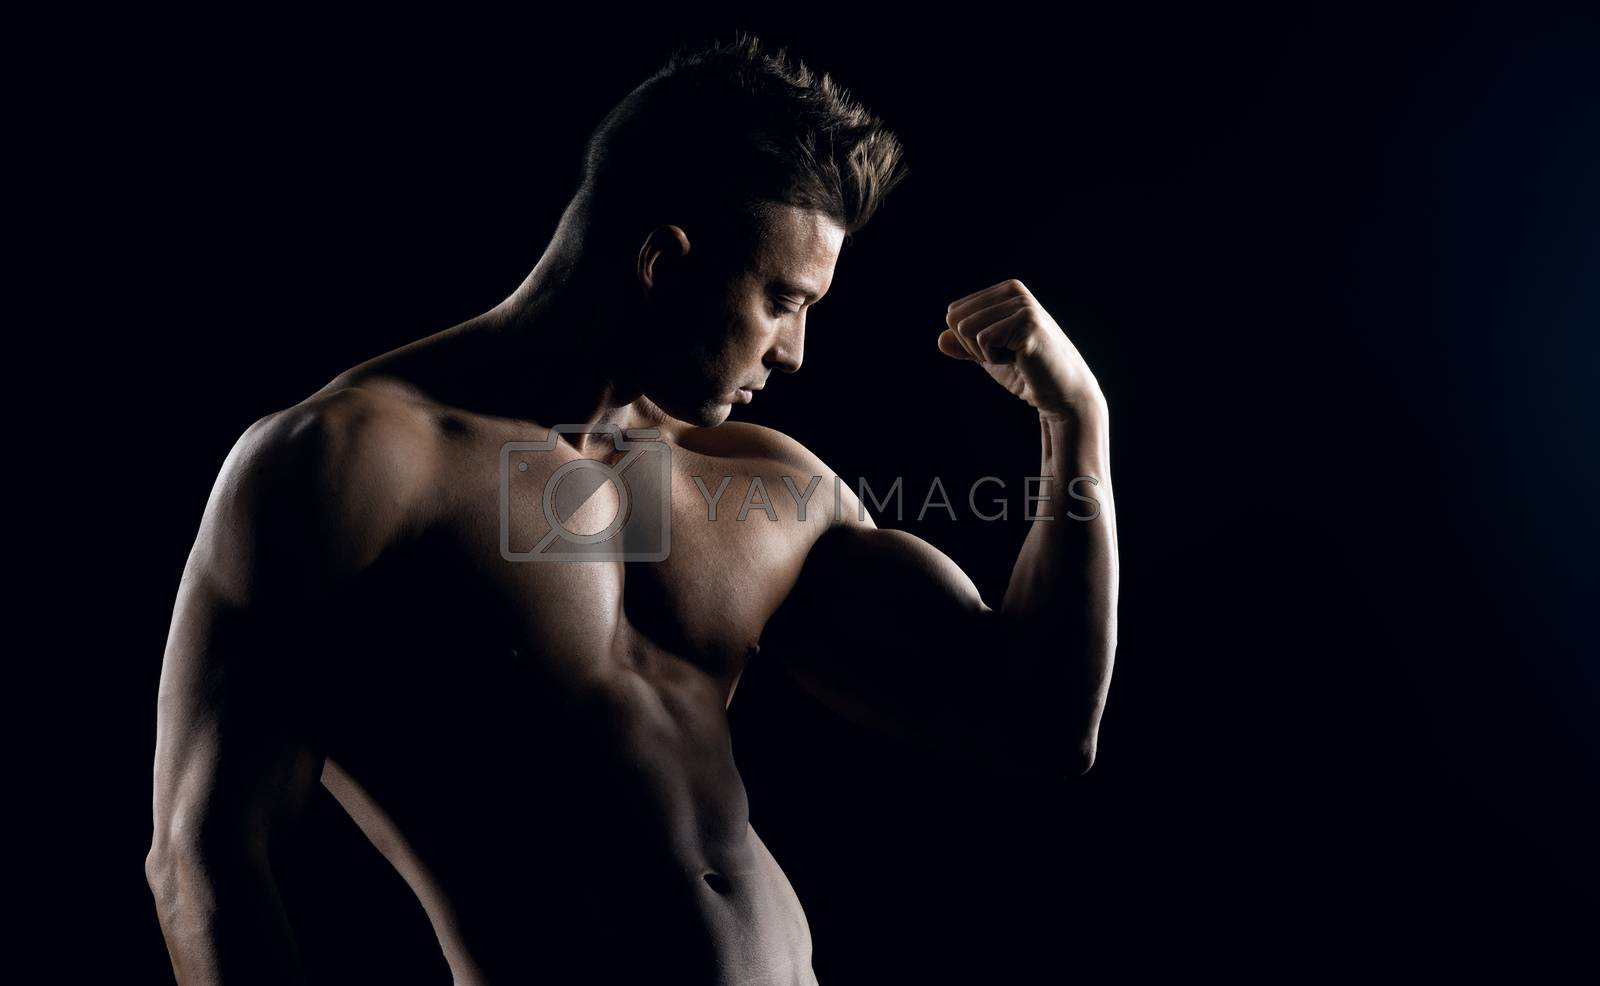 Royalty free image of Body builder posing by stokkete